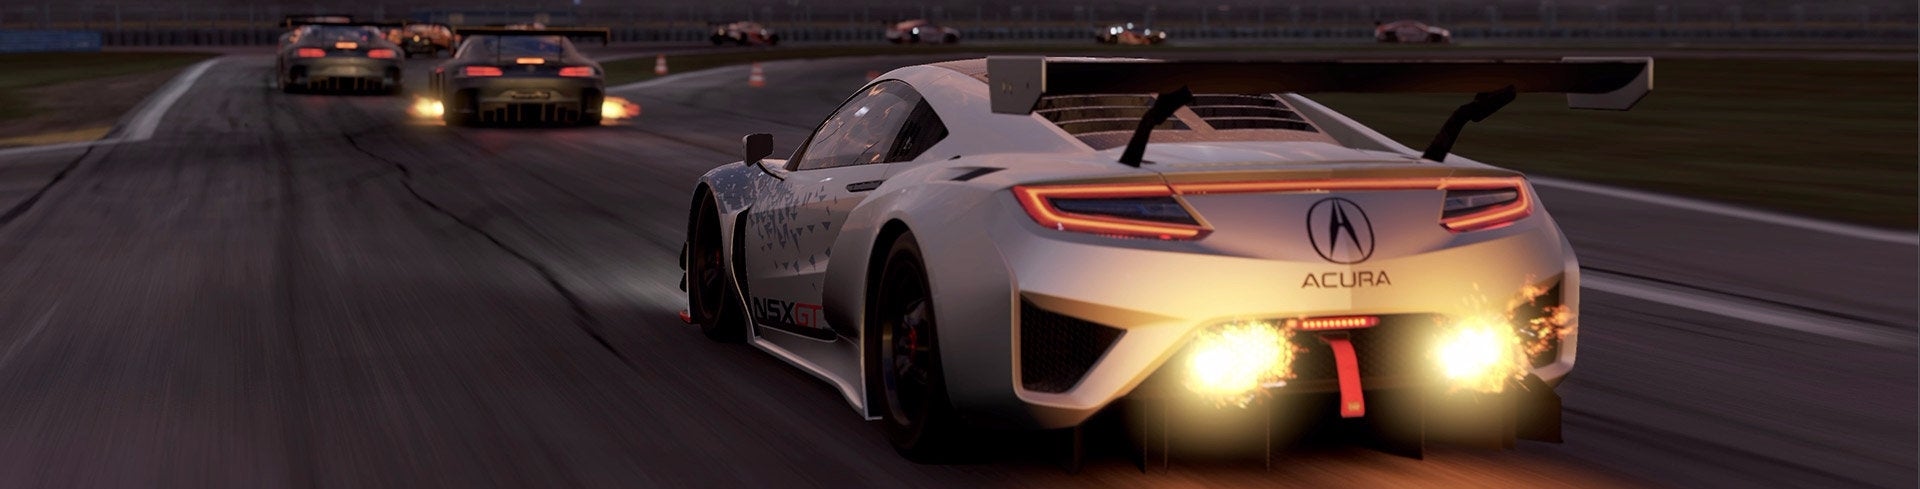 Image for Project Cars 2 runs best on PlayStation 4 Pro